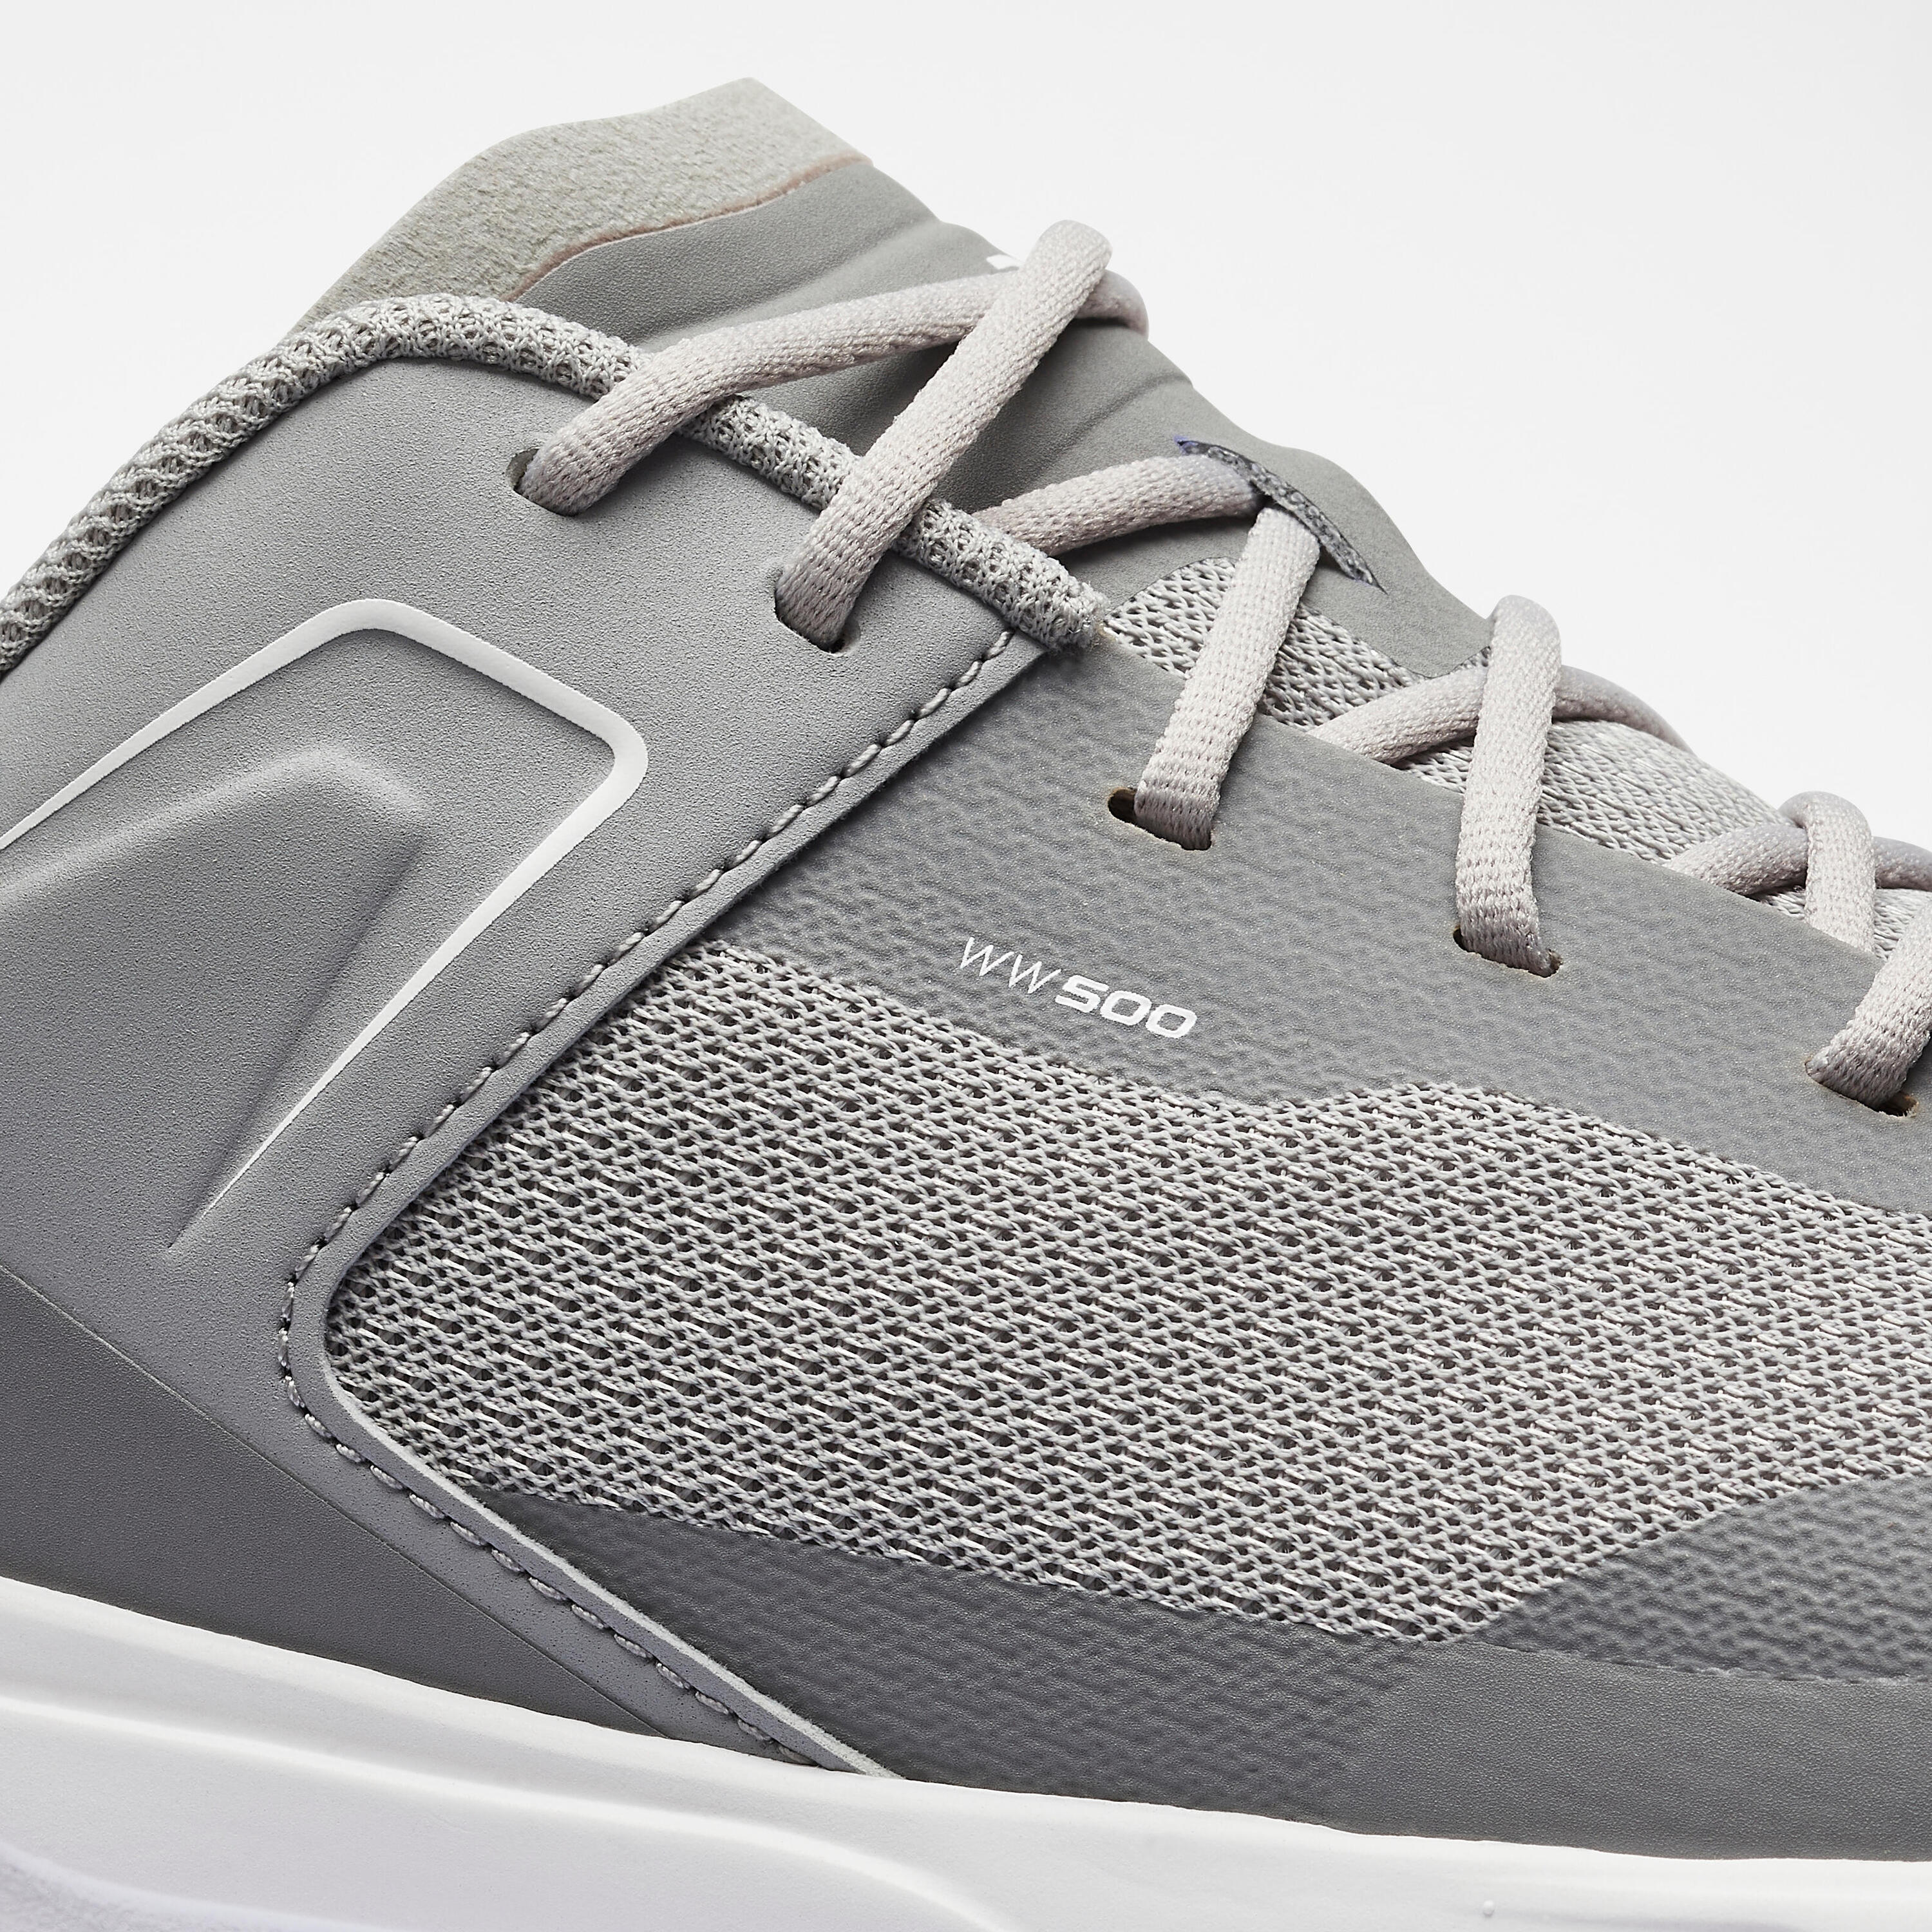 Men's Breathable Golf Shoes - WW 500 Grey 4/5